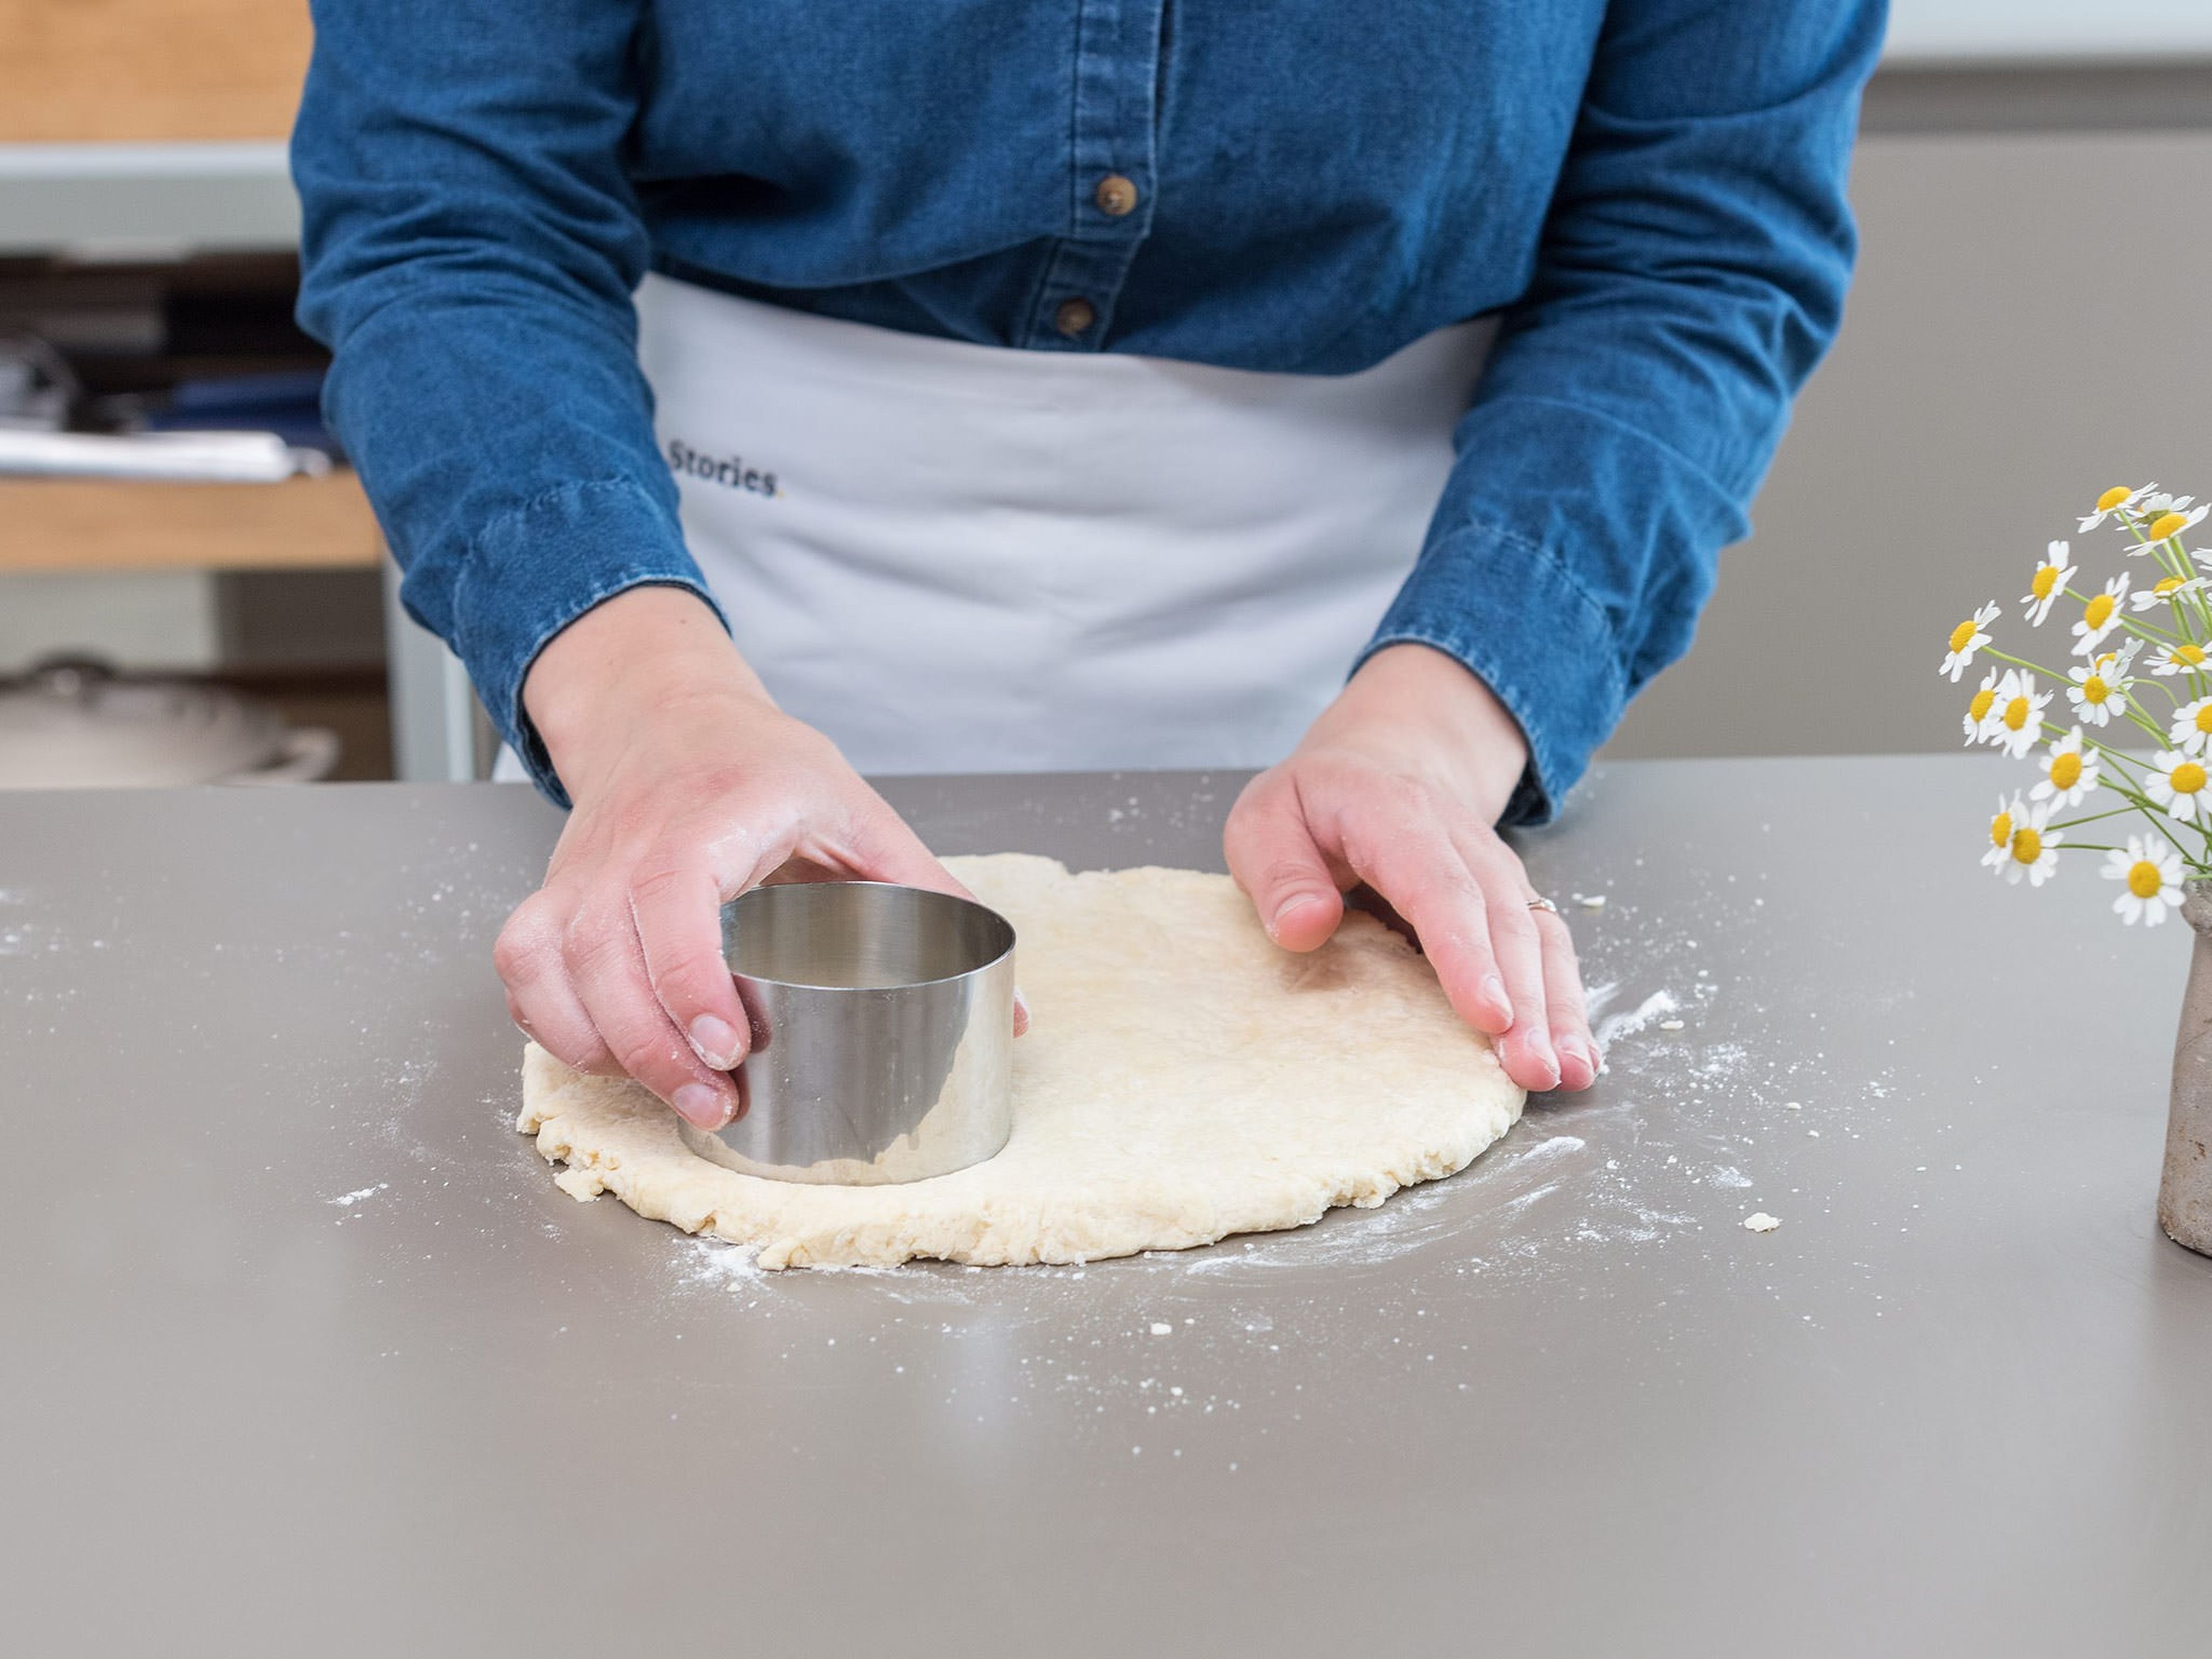 For the scones, preheat the oven to 200 °C/400 °F and line a baking sheet with parchment paper, if needed. In a large mixing bowl, mix together flour, salt, baking soda, and sugar. Cut the butter into cubes, add to flour mixture, and use your fingers to break up and coat butter until crumbly. Add buttermilk and form into a dough. Roll out the dough until 4-cm/1.5-inch. thick and cut out circles with a cookie cutter. Transfer to baking sheet leaving a little space in between each one. Beat the egg and brush the scones. Sprinkle each scone with a pinch of sugar and bake in the oven for approx. 20 min., or until golden brown.